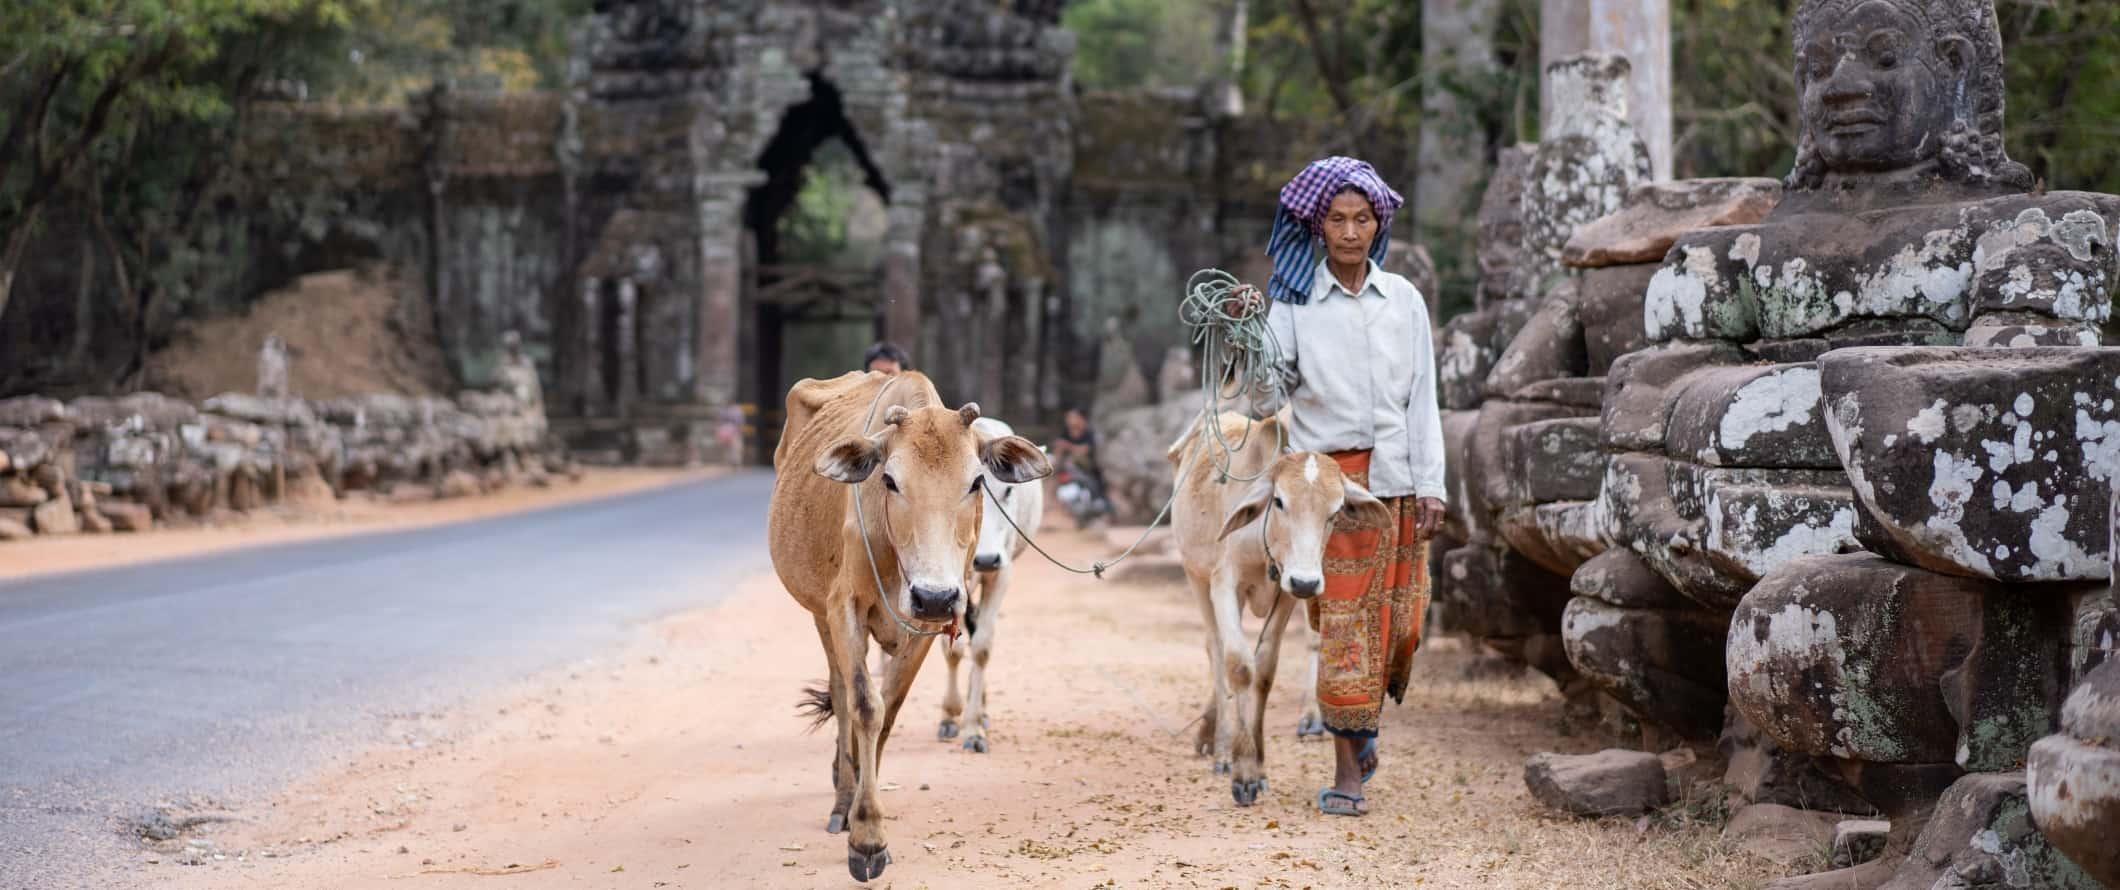 Woman walking down a path with cows next to hear in the ancient temple complex of Angkor Wat, Cambodia